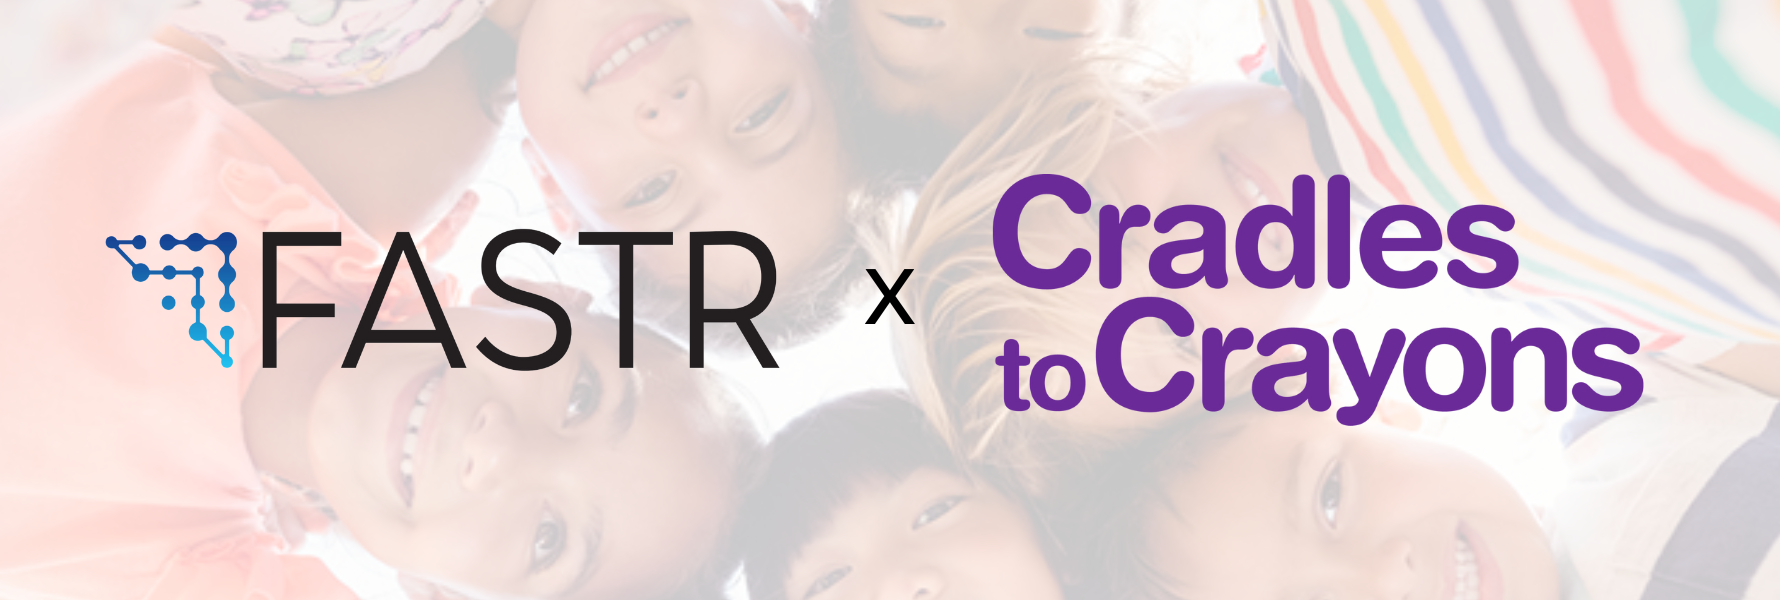 Fastr in the Community: An Afternoon with Cradles to Crayons